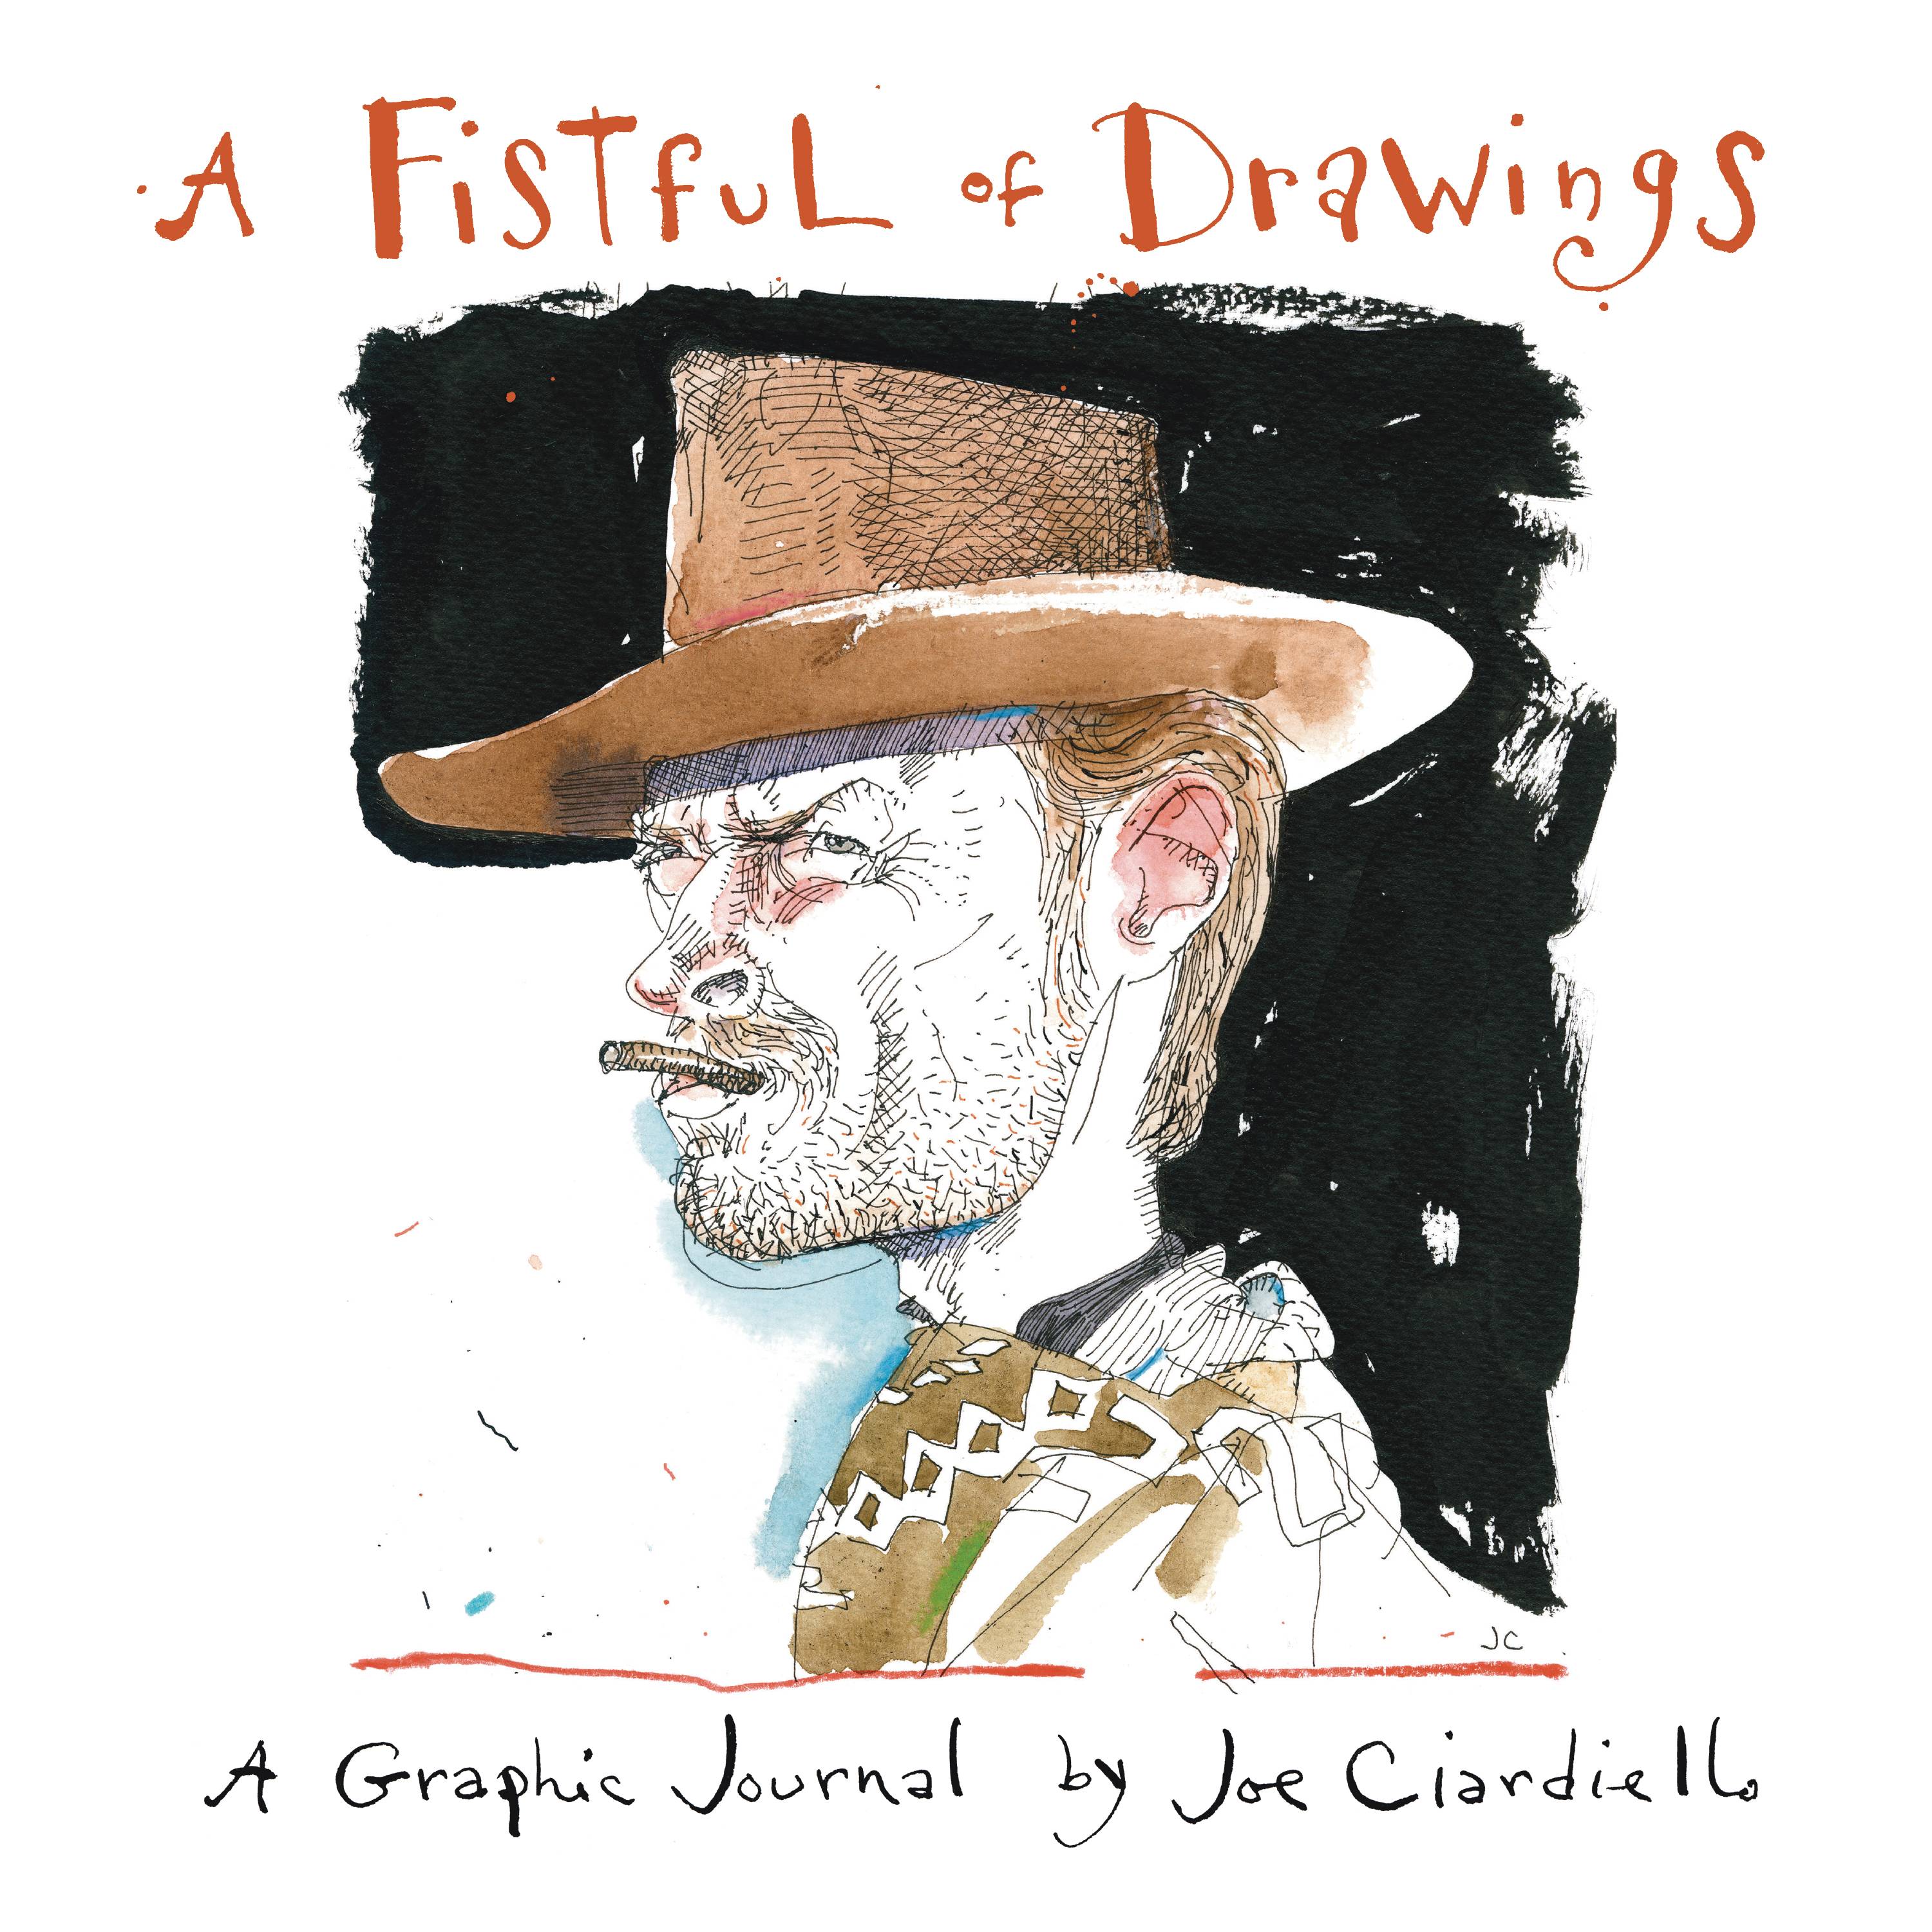 A Fistful of Drawings Soft Cover